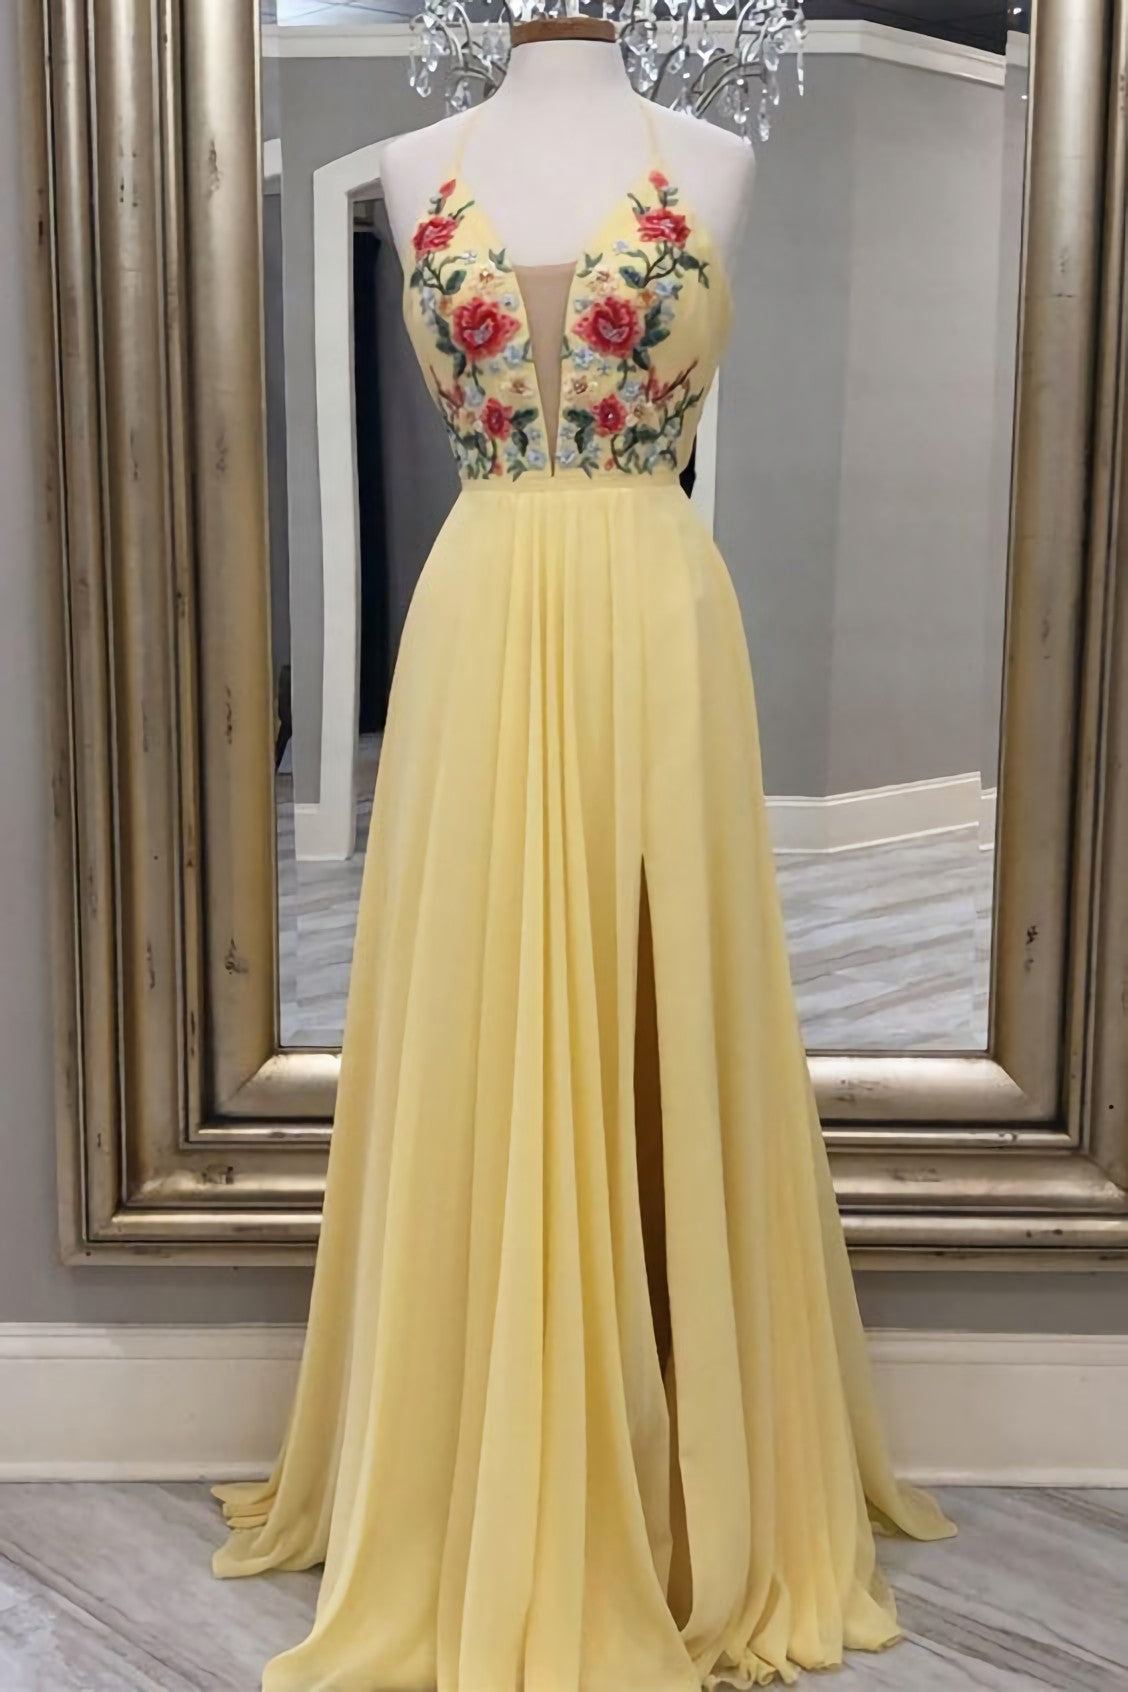 Prom Dresses Blue Light, A Line Yellow Floral Embroidery Long Prom Dress, With Side Slit